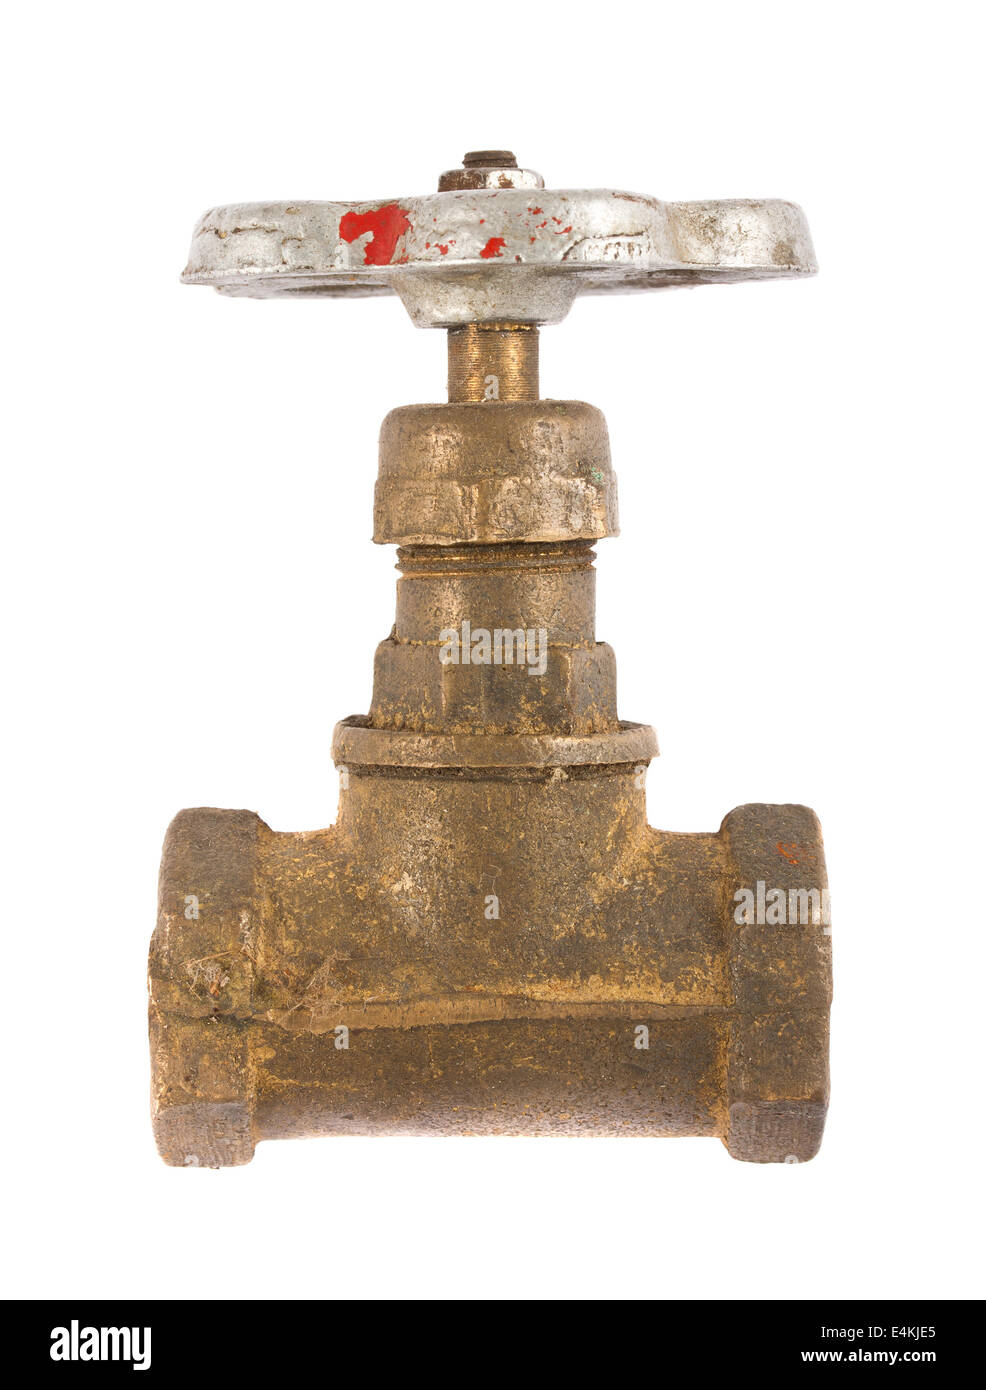 Old used water valve Stock Photo